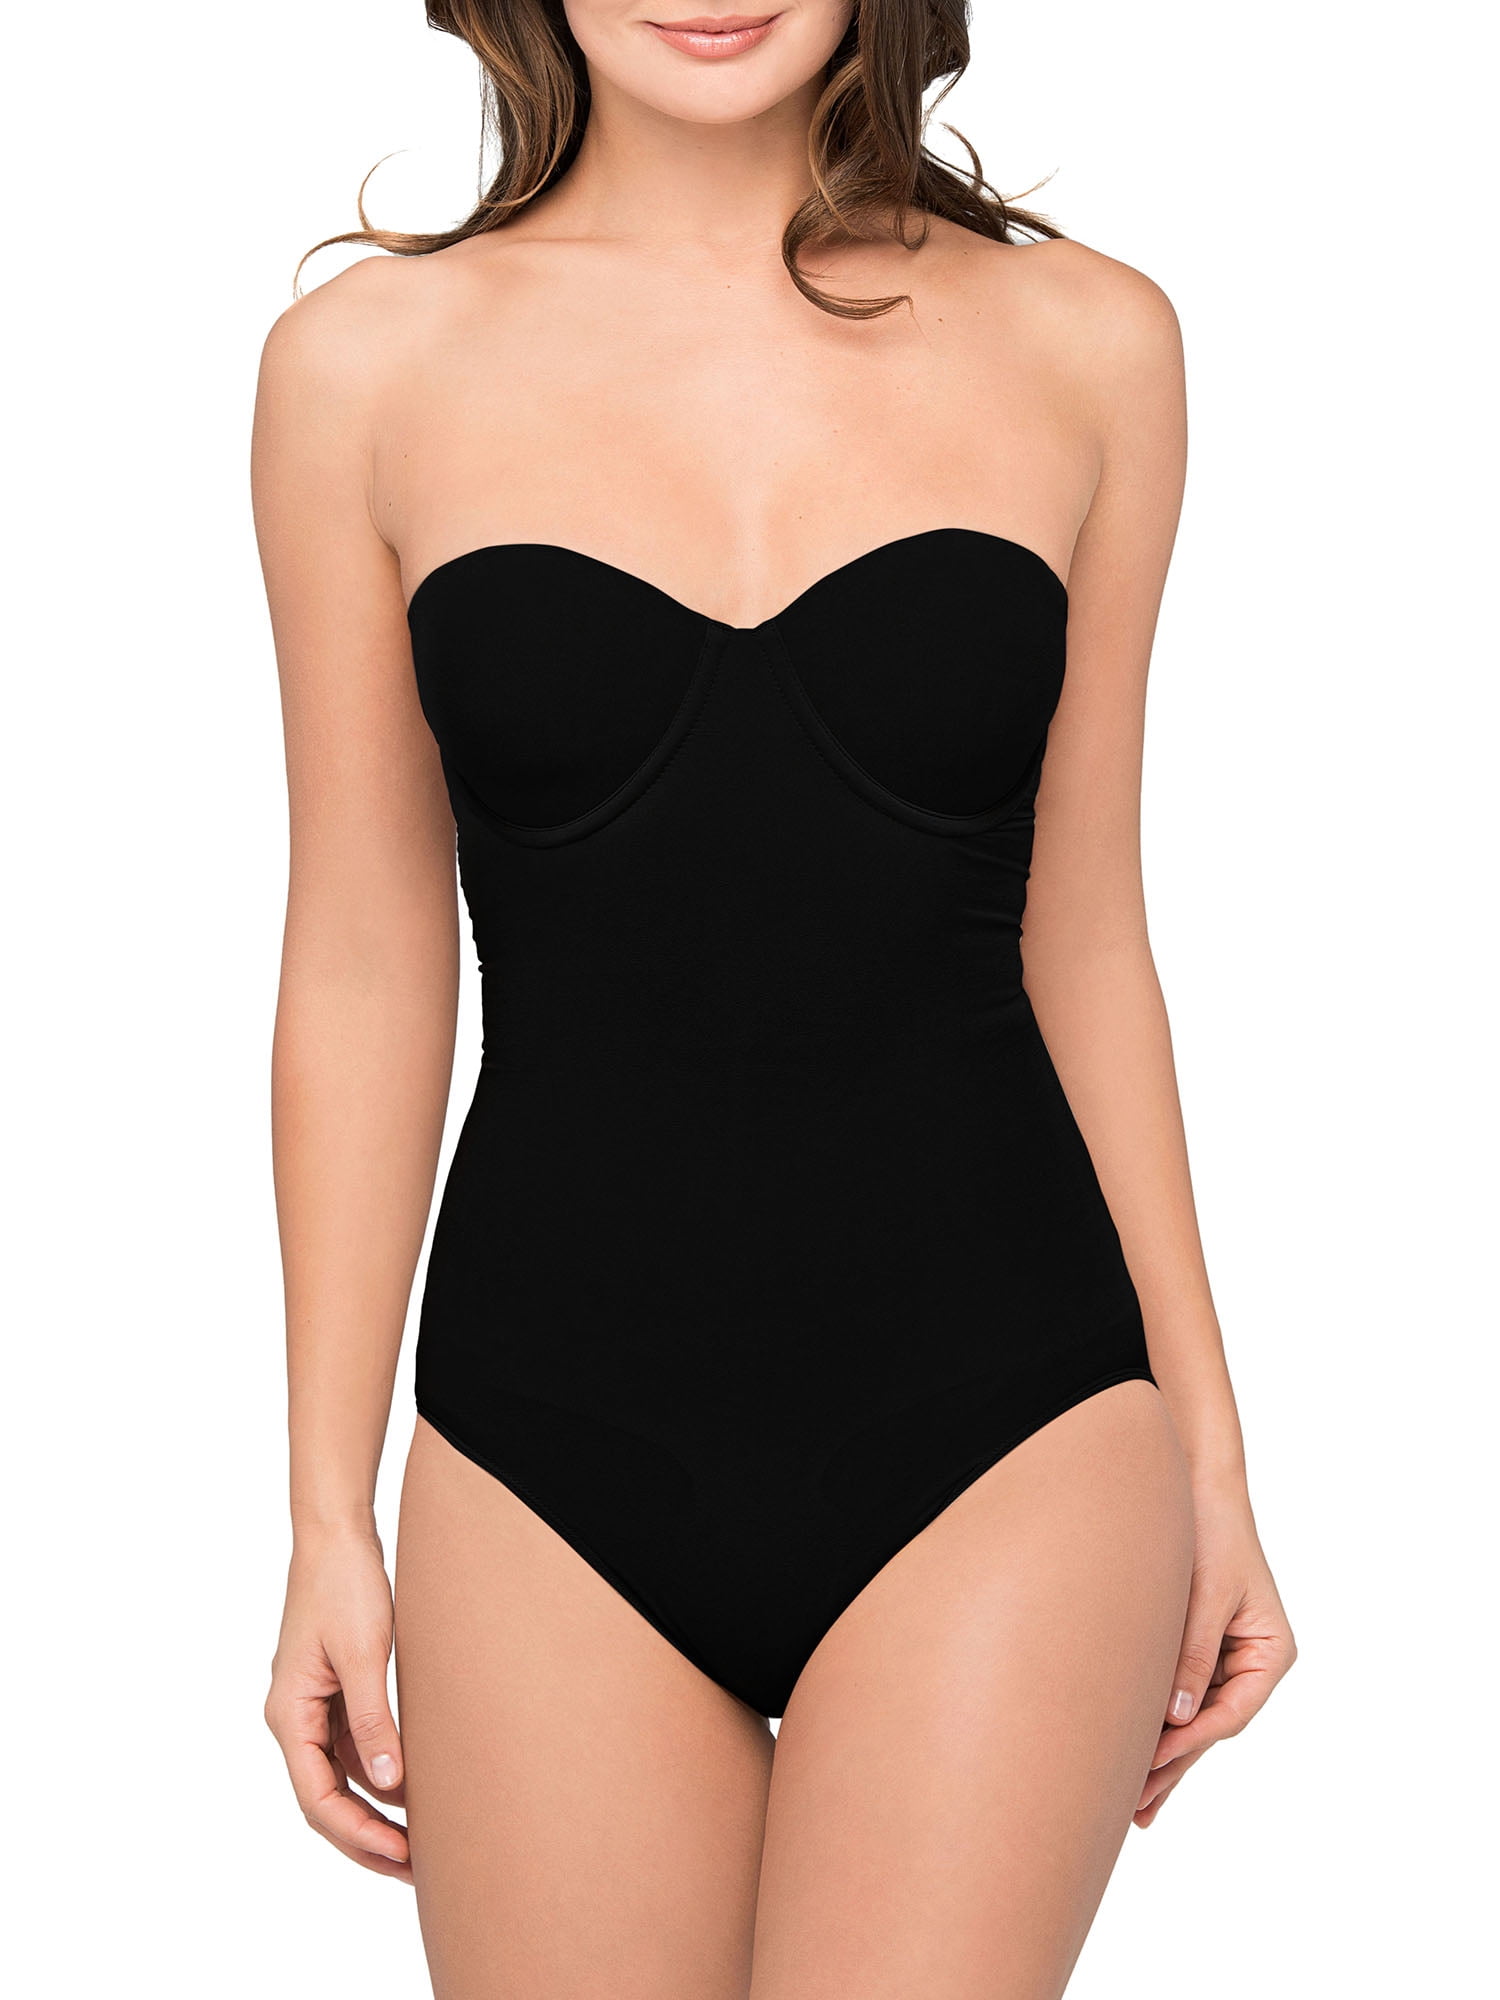 Body Wrap Womens Firm Control Convertible Bodysuit Style-44003 